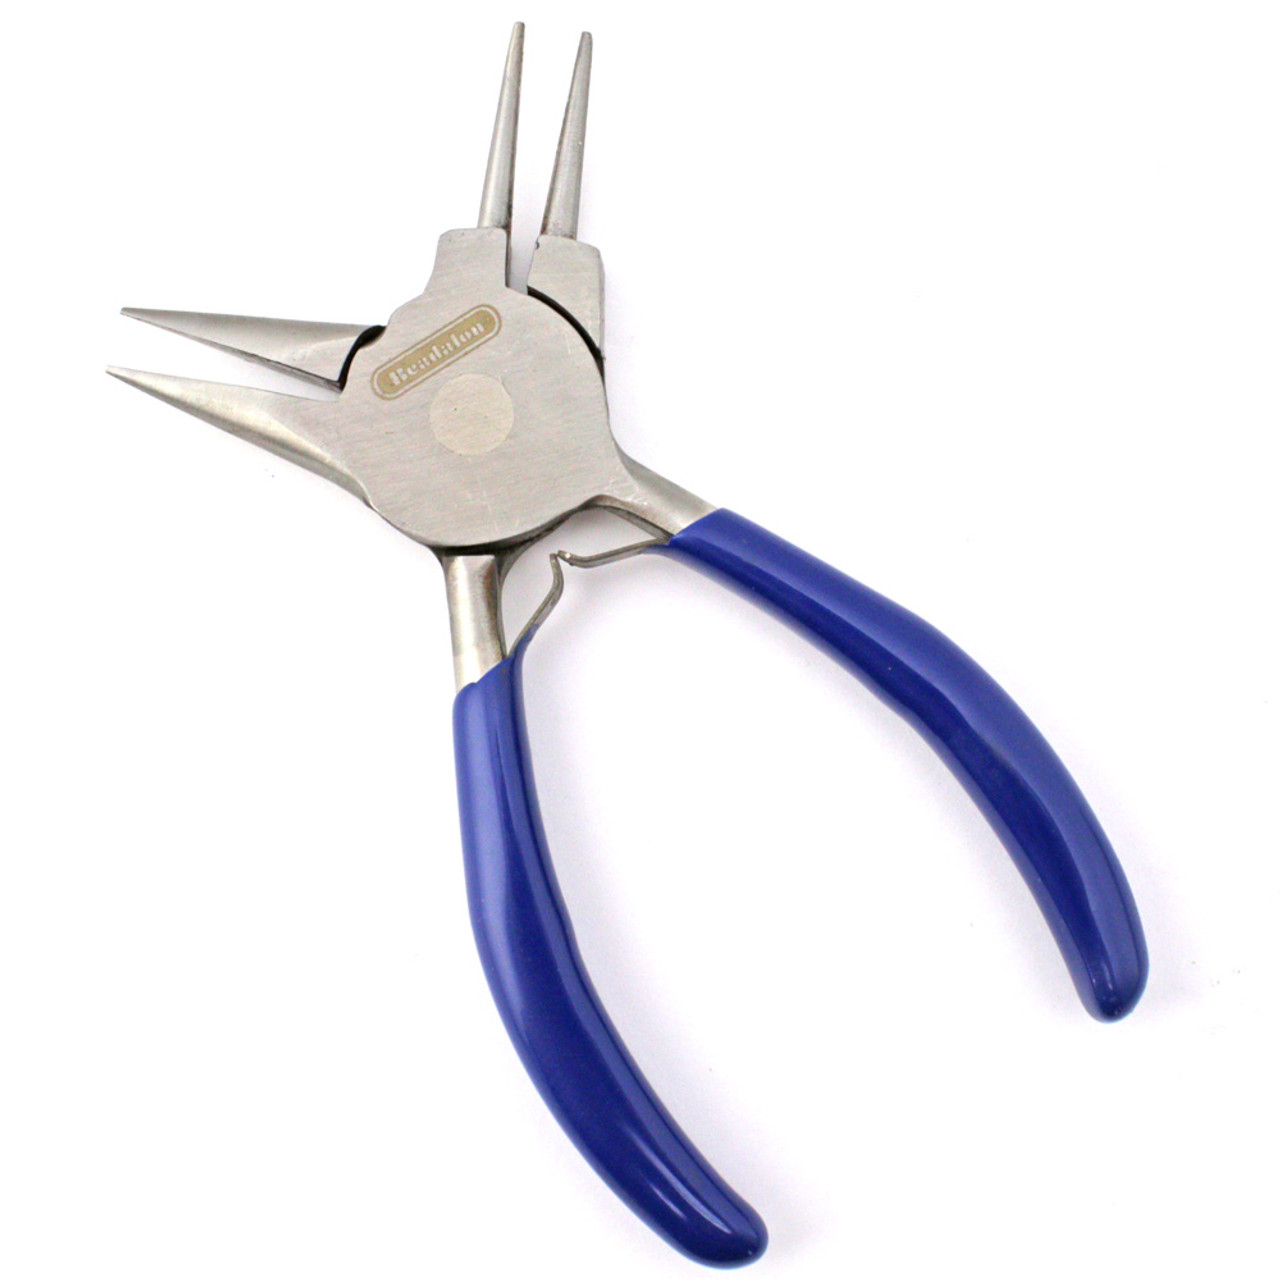 Multi Pliers 2 in 1 Combination Round Nose and Chain Nose Pliers